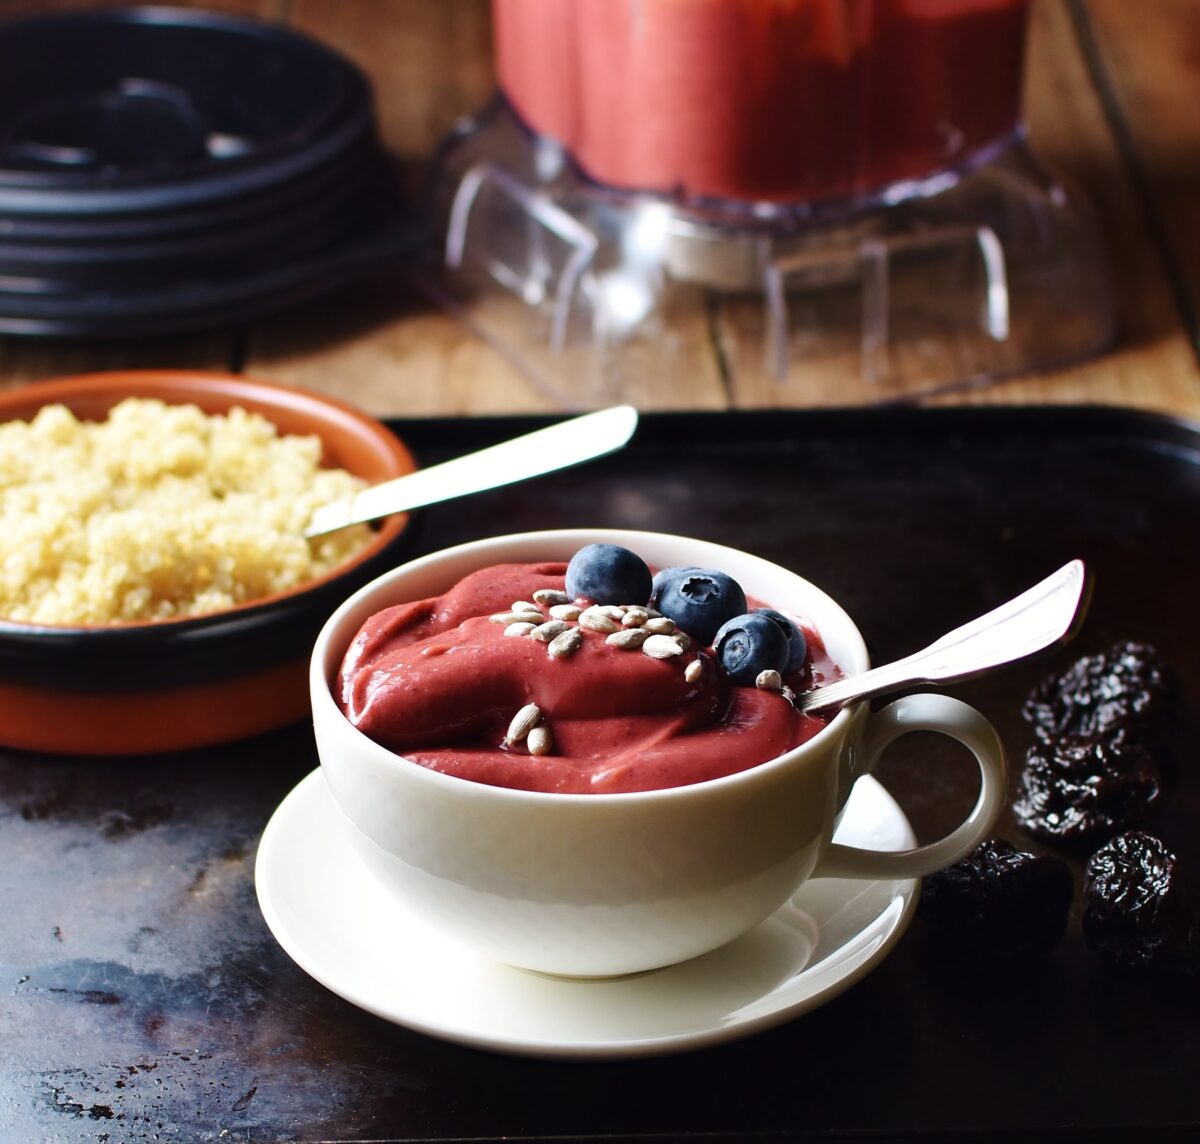 Side view of raspberry smoothie in white cup with spoon, seeds and blueberries on top of white saucer, with cooked quinoa in brown dish with spoon and smoothie in blender in background.